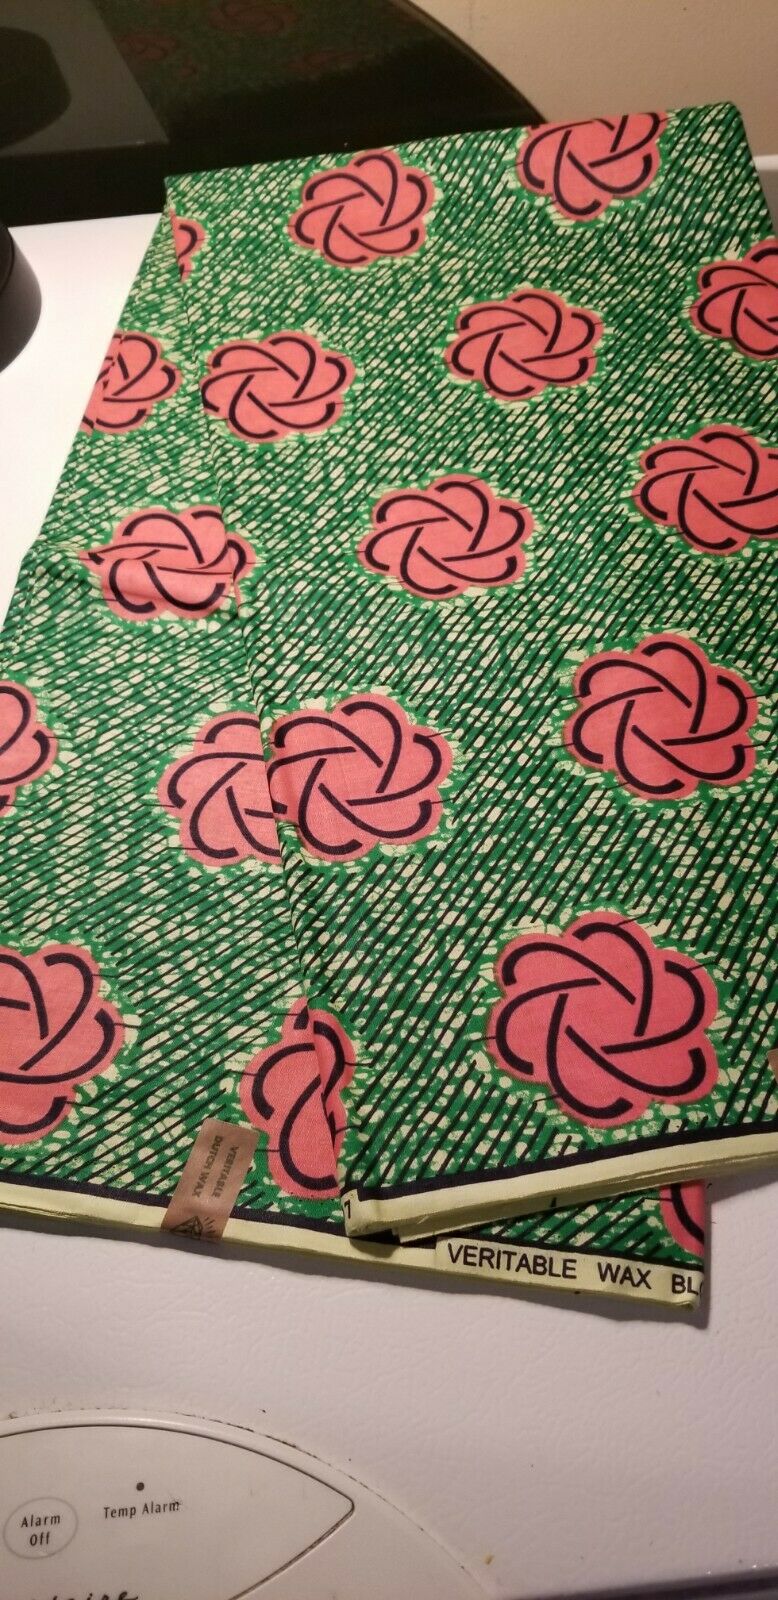 African Print Green and pink accents(obaapaa~Good Woman) 6yards